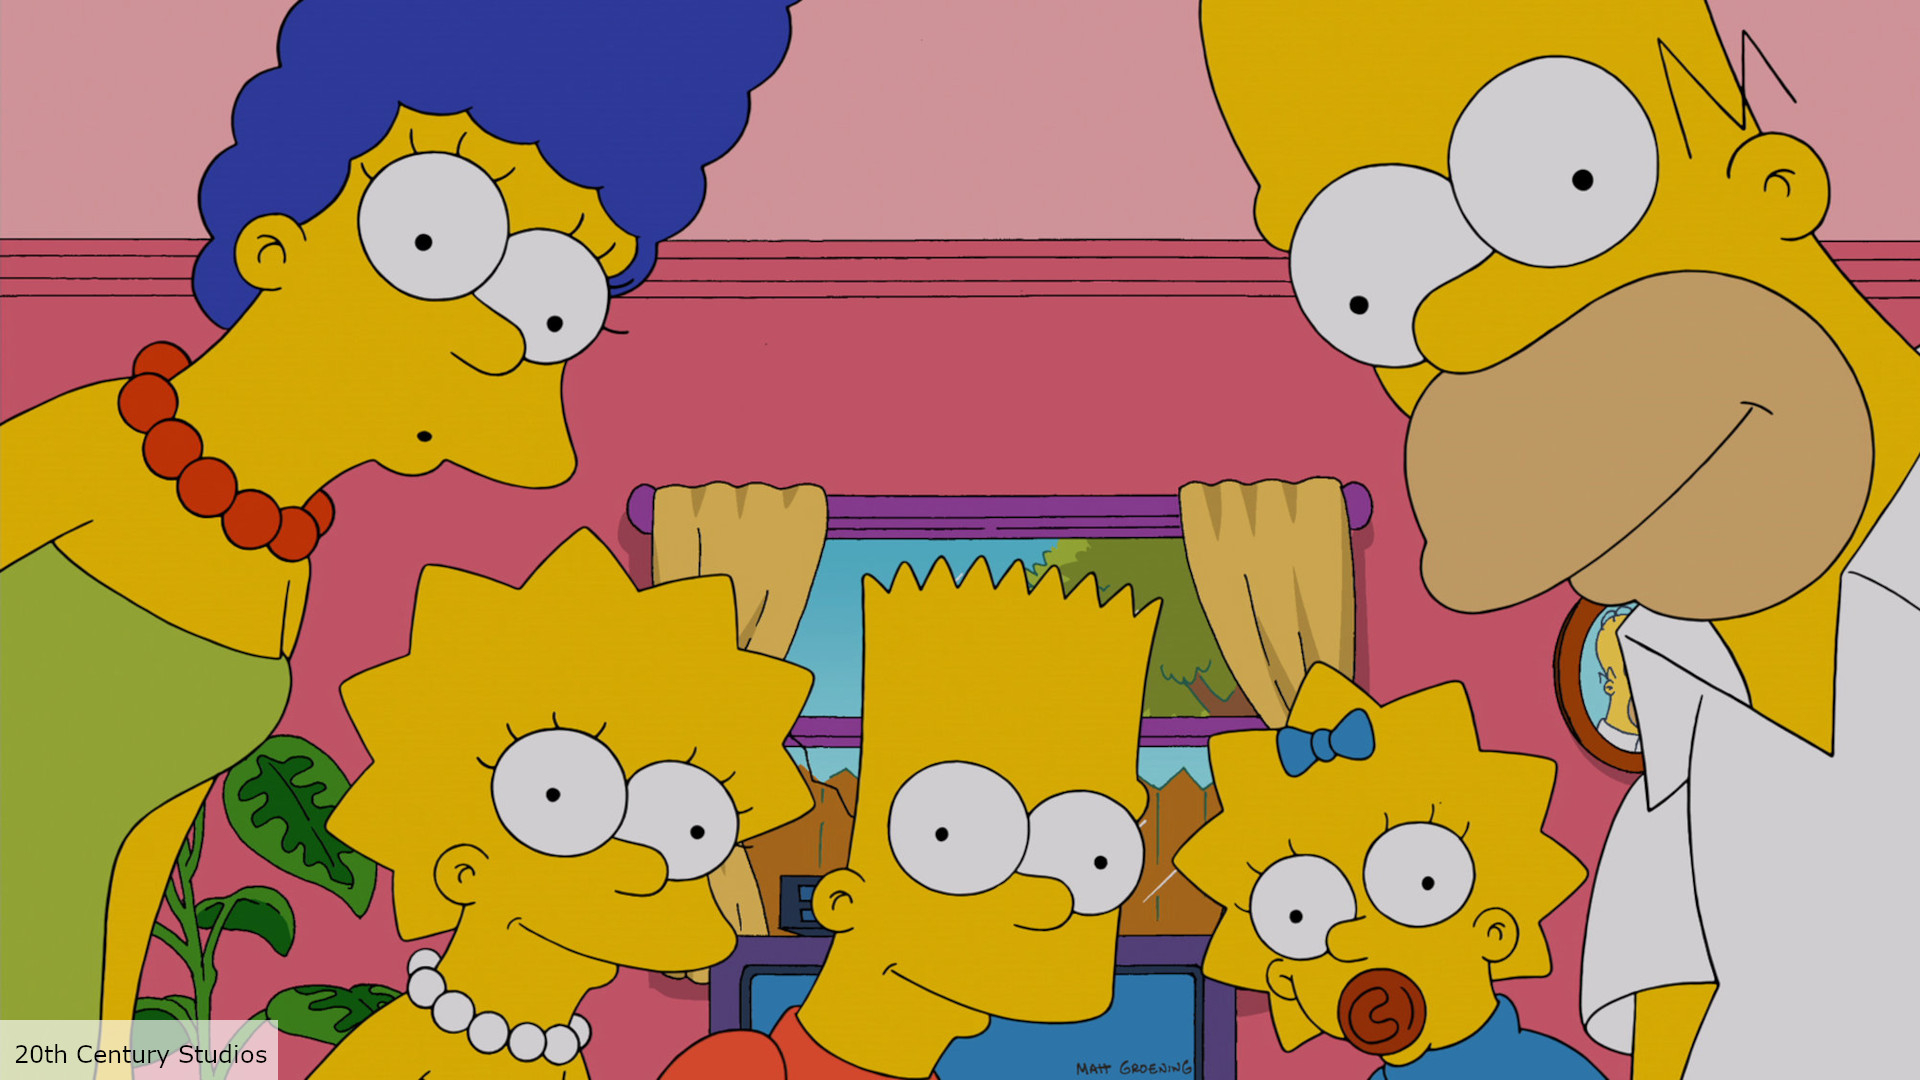 1920x1080 The Simpsons showrunner shares awesome way he'd end the TV series | The Digital Fix